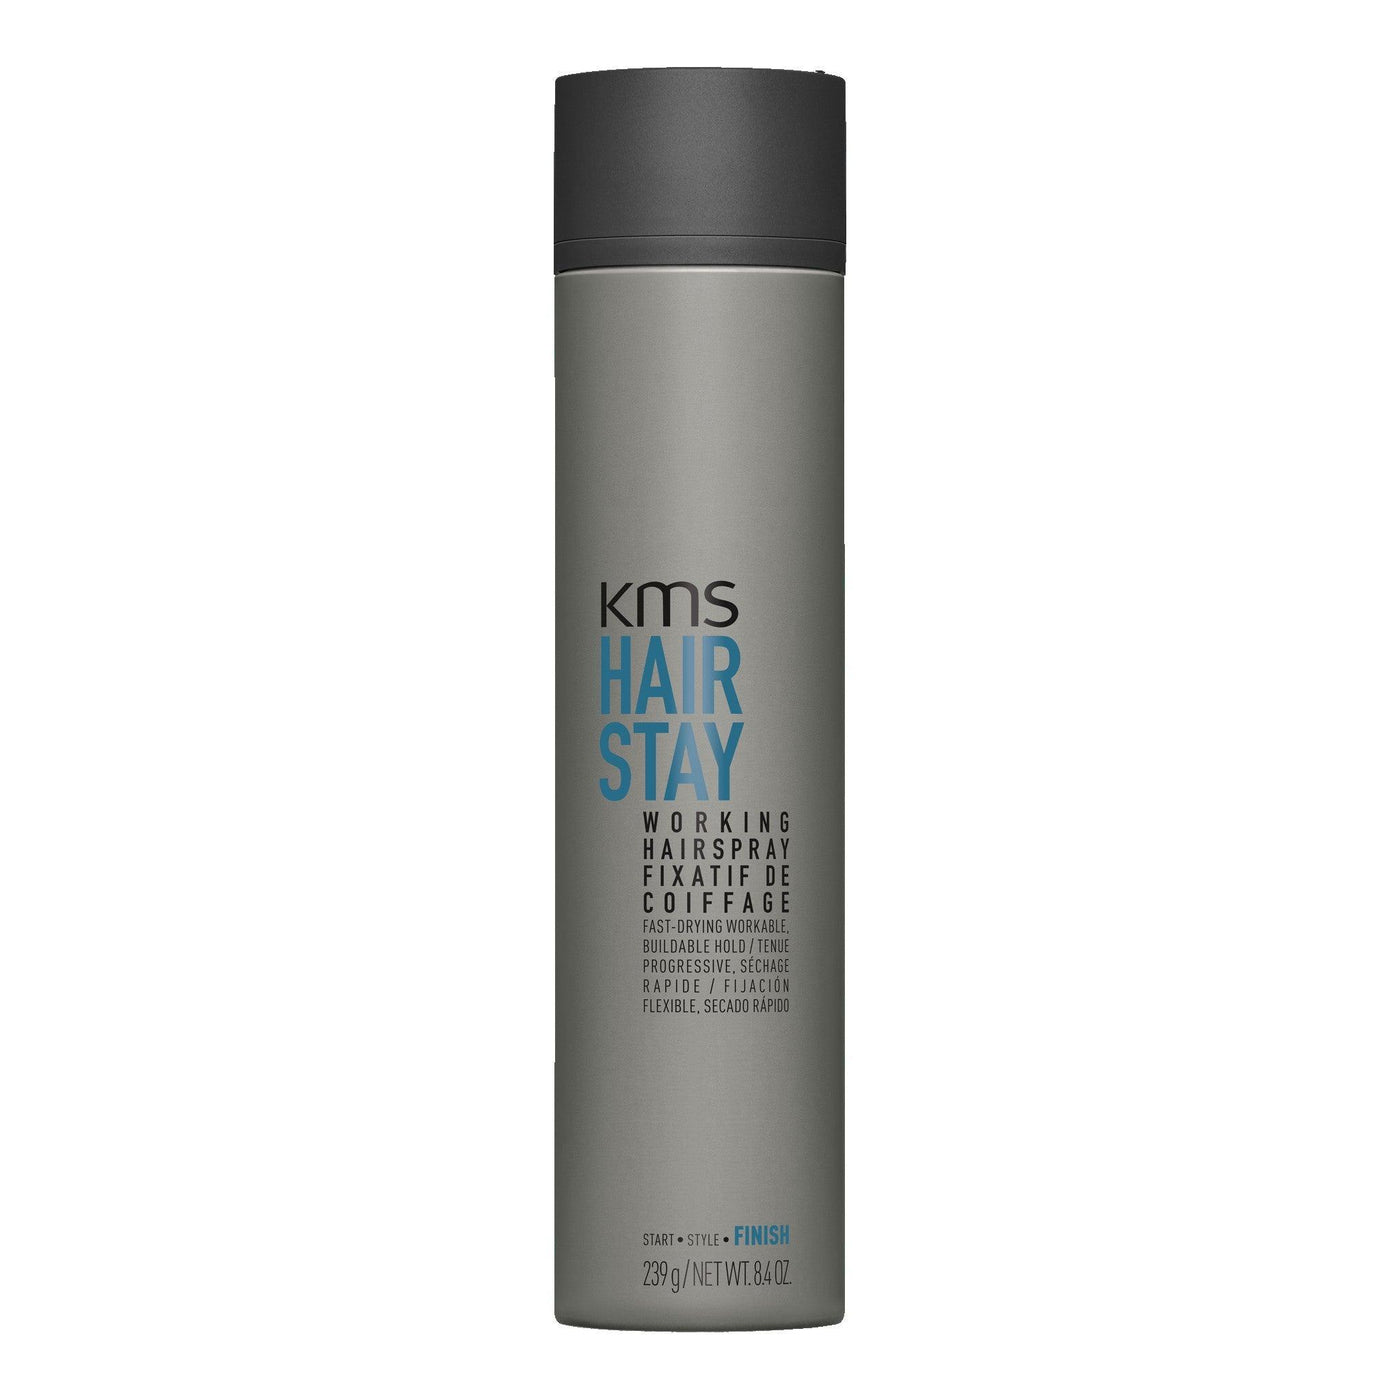 Kms Hairstay Working Hairspray 300ml KMS Boutique Deauville